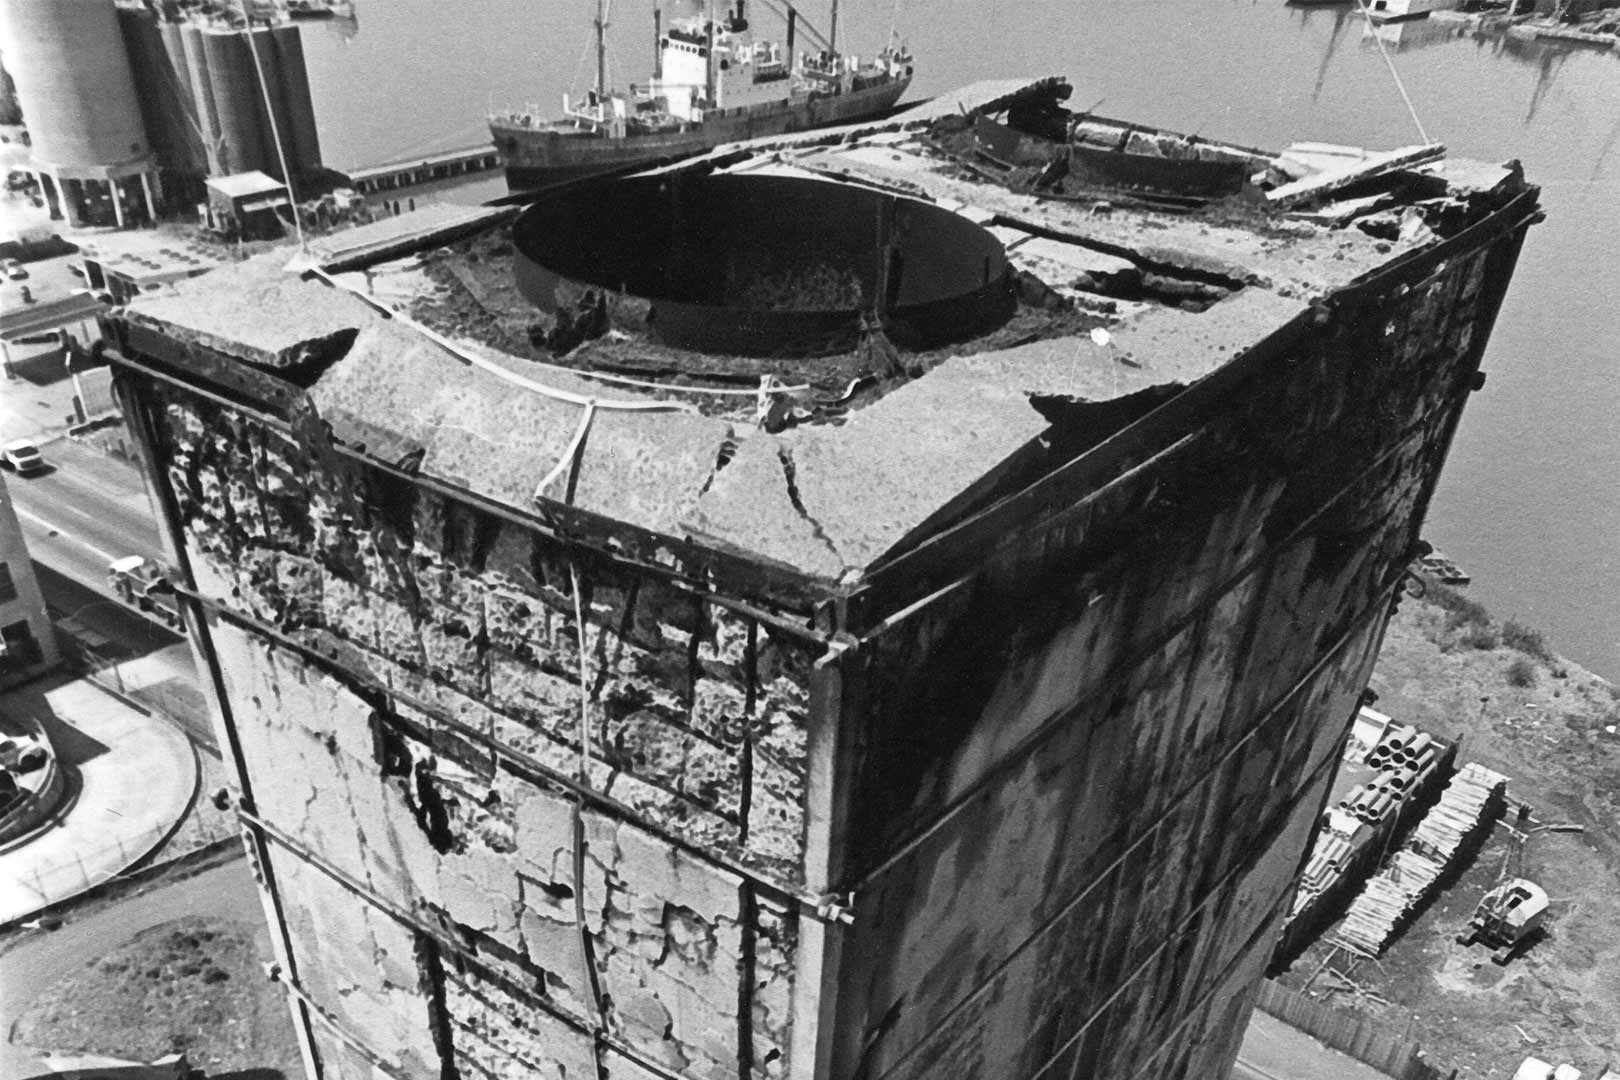 Pyrmont Incinerator (also known as the Griffin Destructor), 1976 (Photograph: City of Sydney Archives)